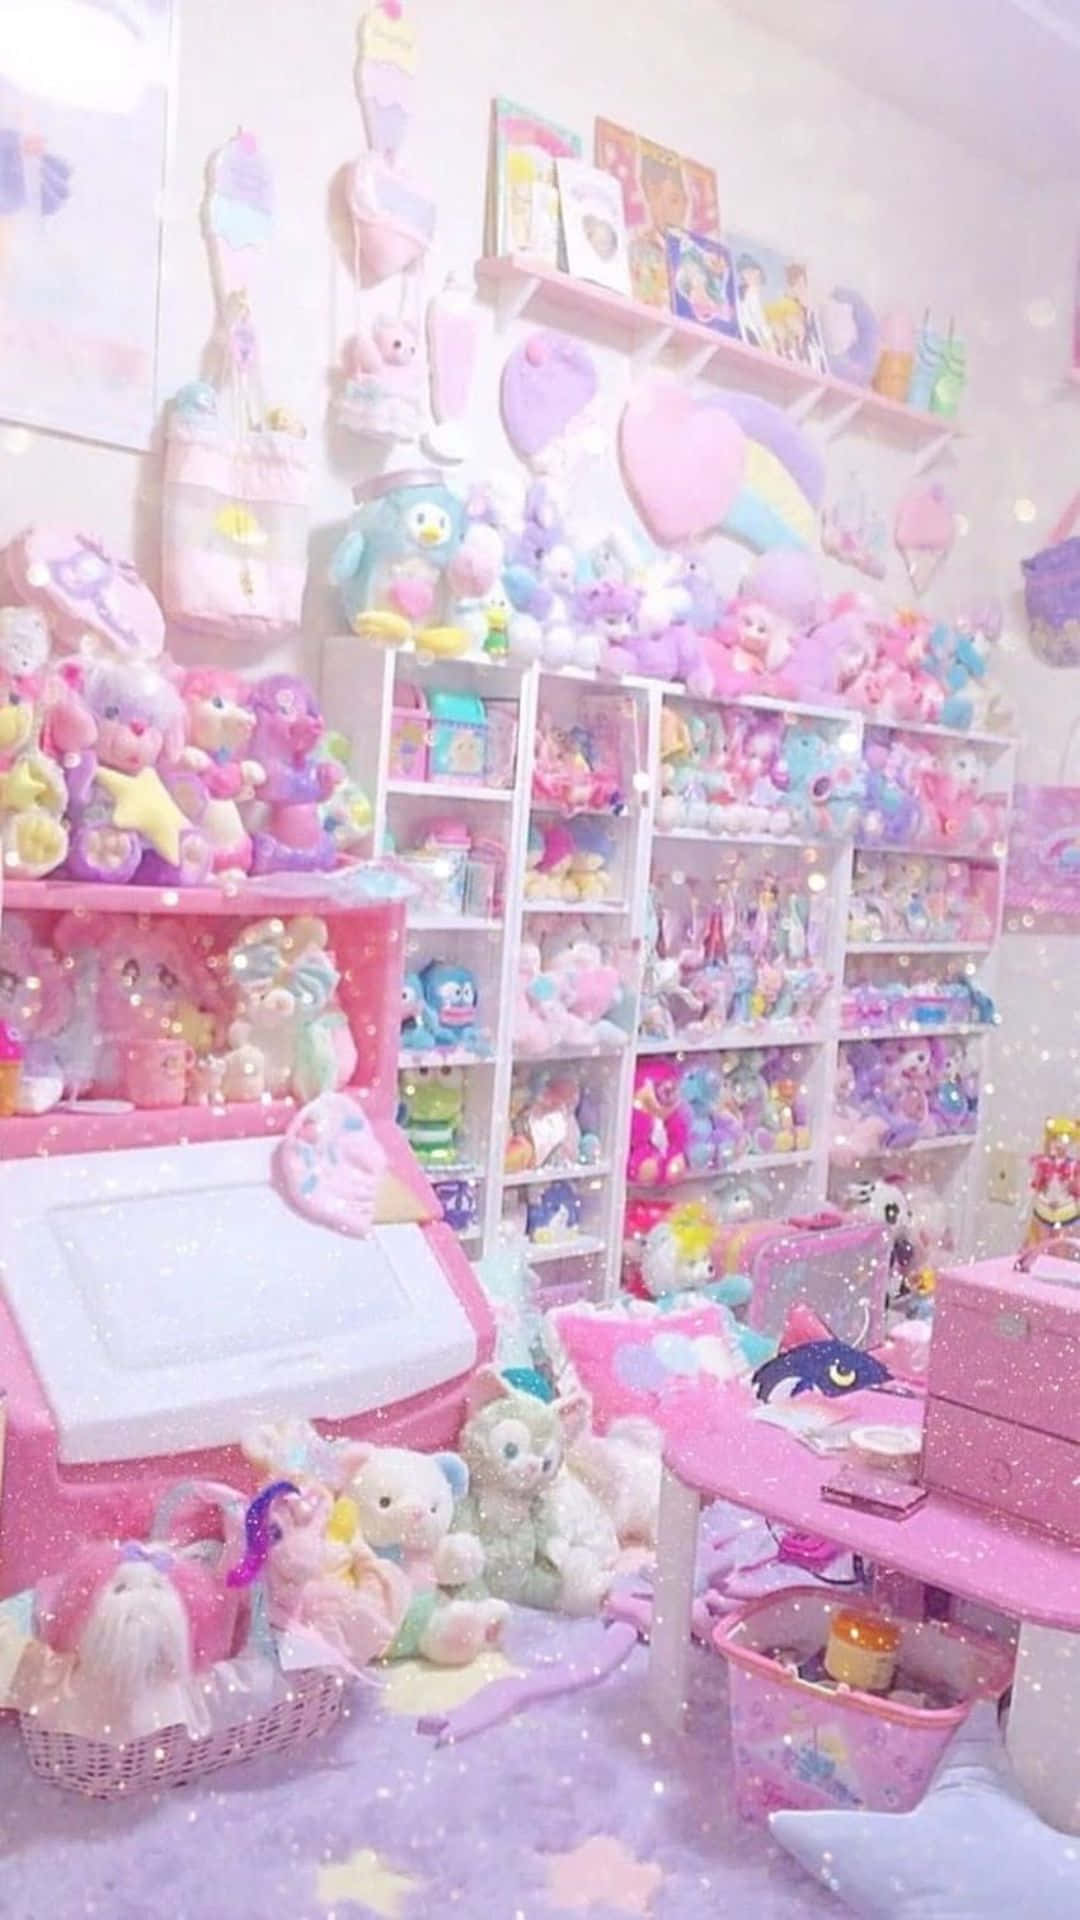 Adorable Kawaii-themed room with pastel colors and plushies Wallpaper